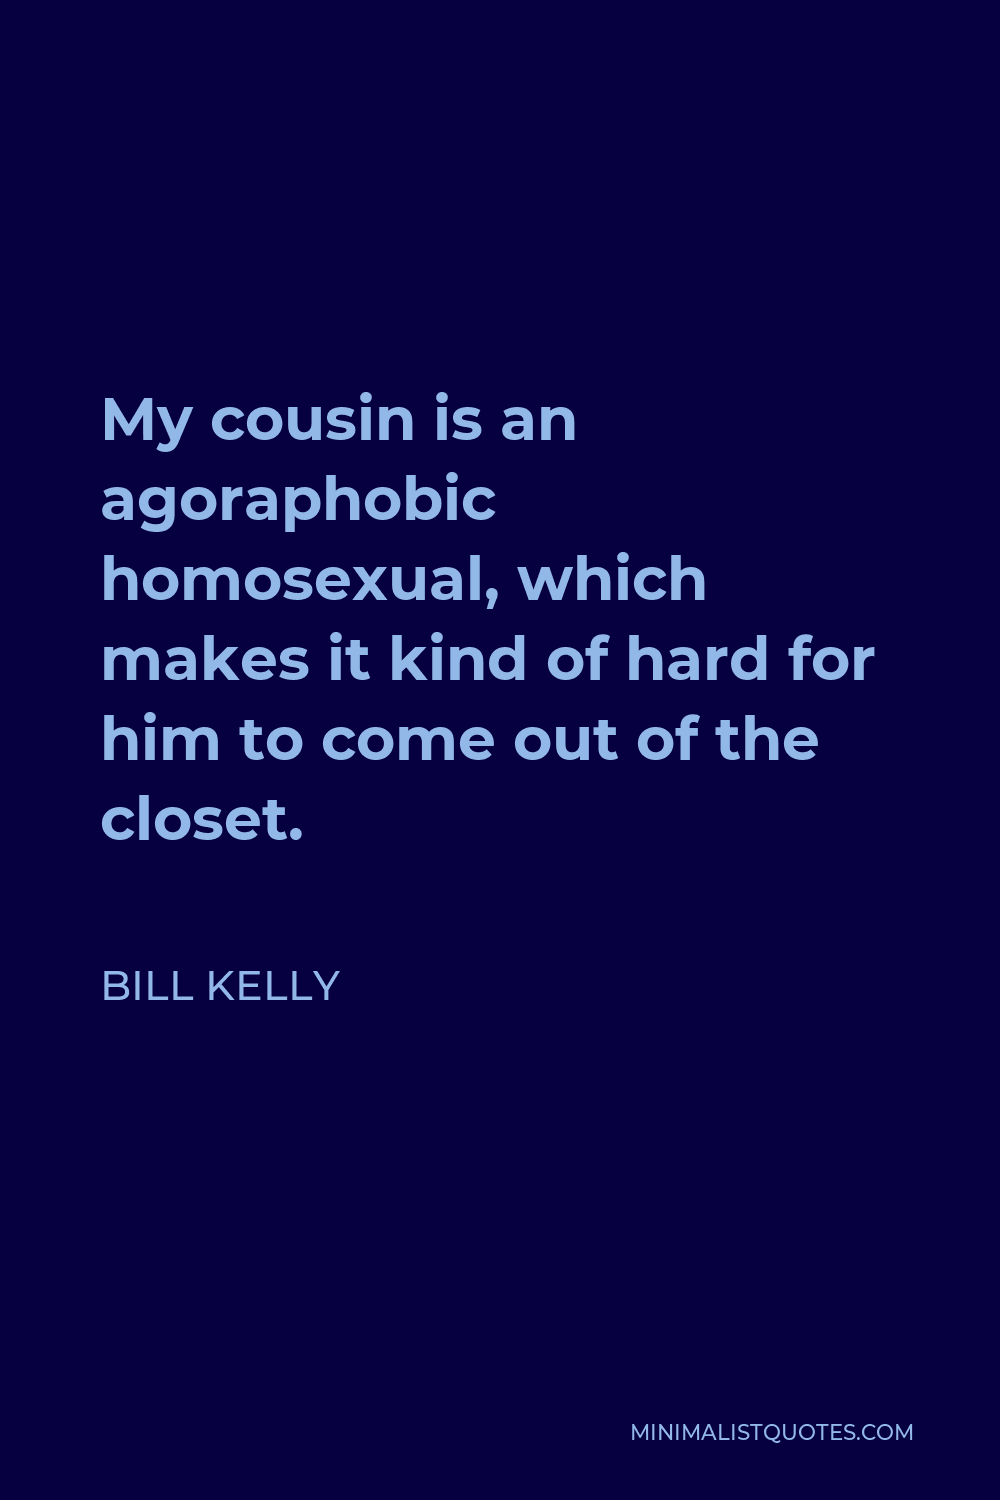 Bill Kelly Quote - My cousin is an agoraphobic homosexual, which makes it kind of hard for him to come out of the closet.